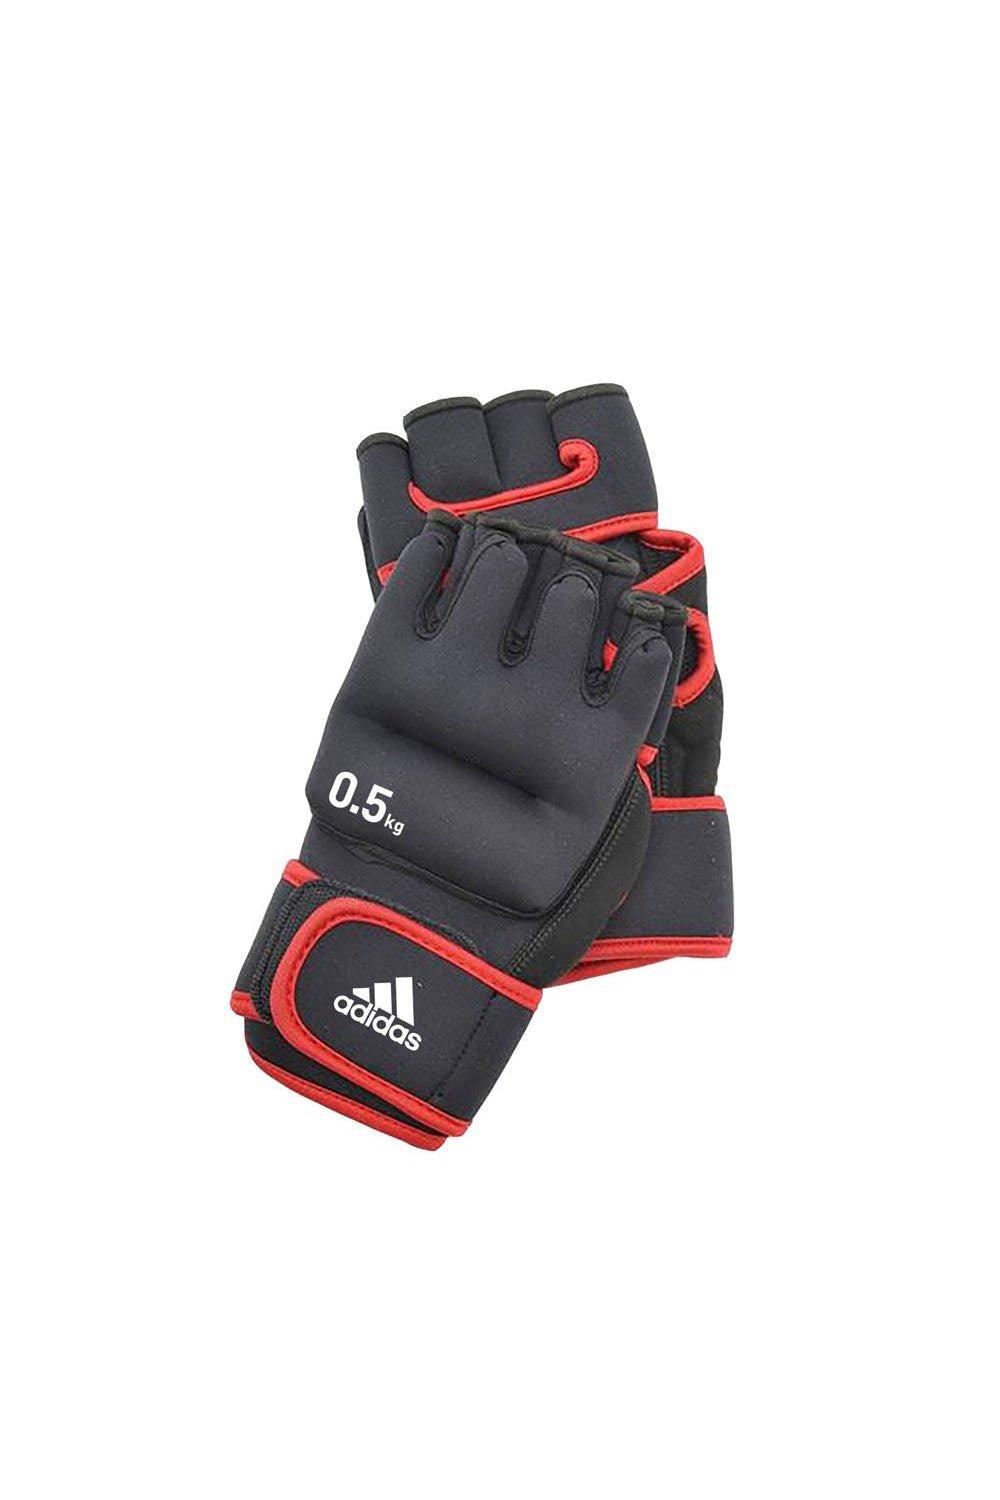 Adidas Weighted Training Gloves|black